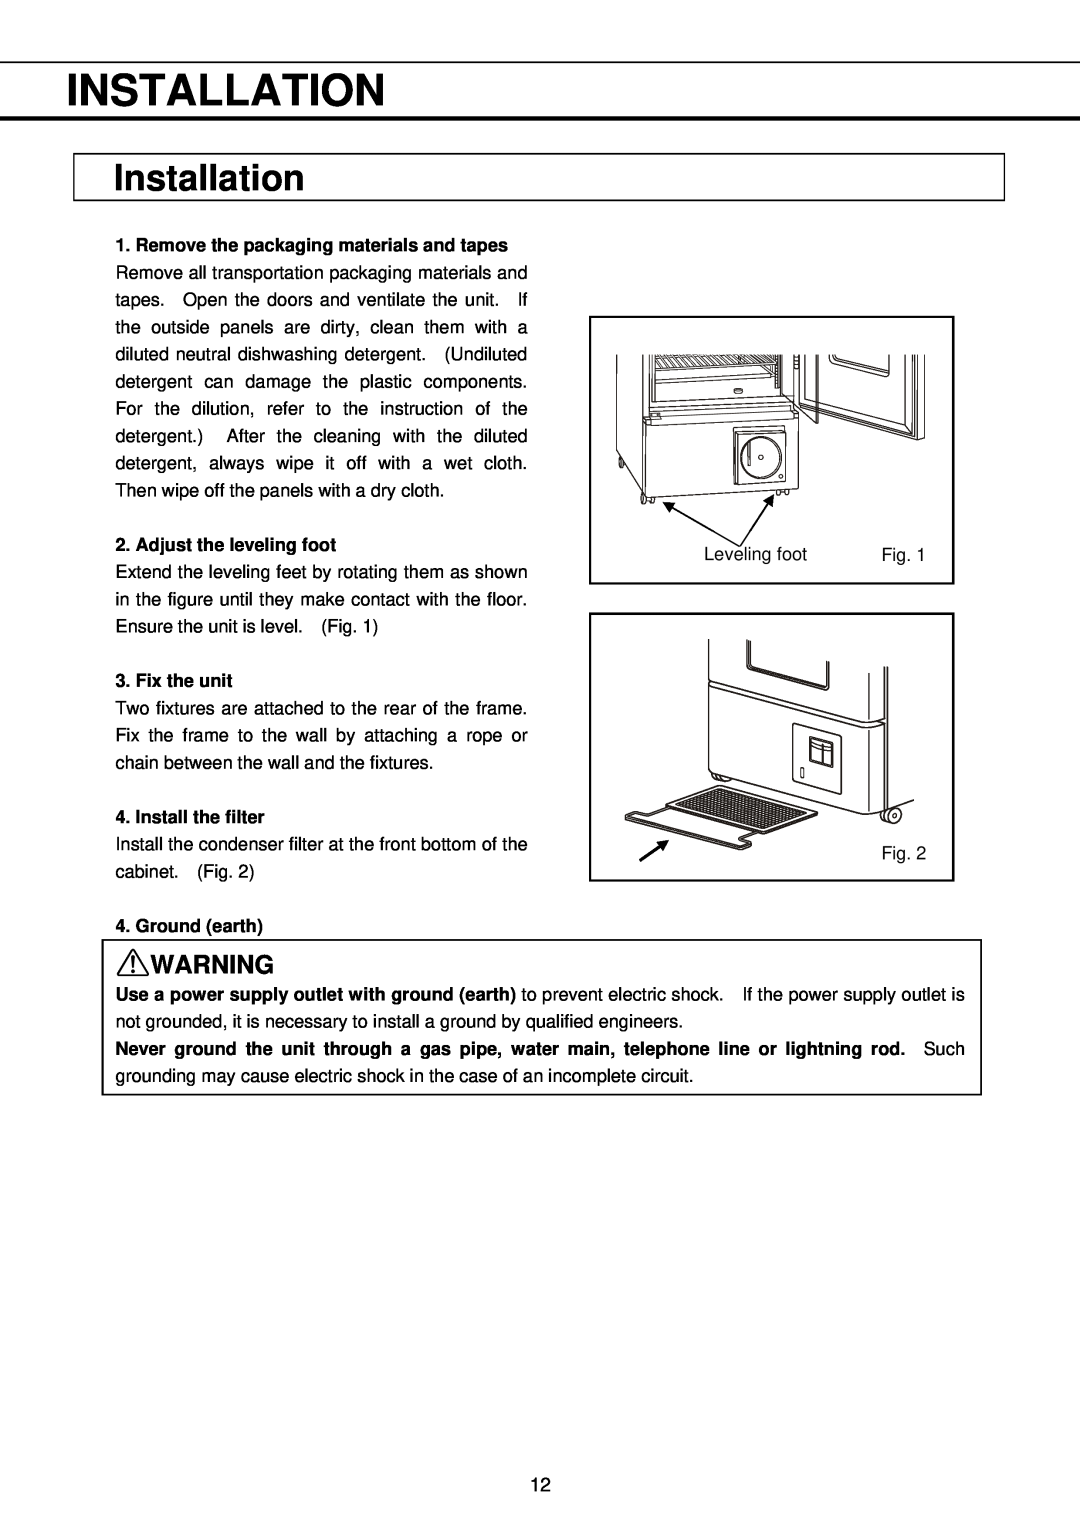 Sanyo MBR-304DR Installation, Remove the packaging materials and tapes, Adjust the leveling foot, Fix the unit 